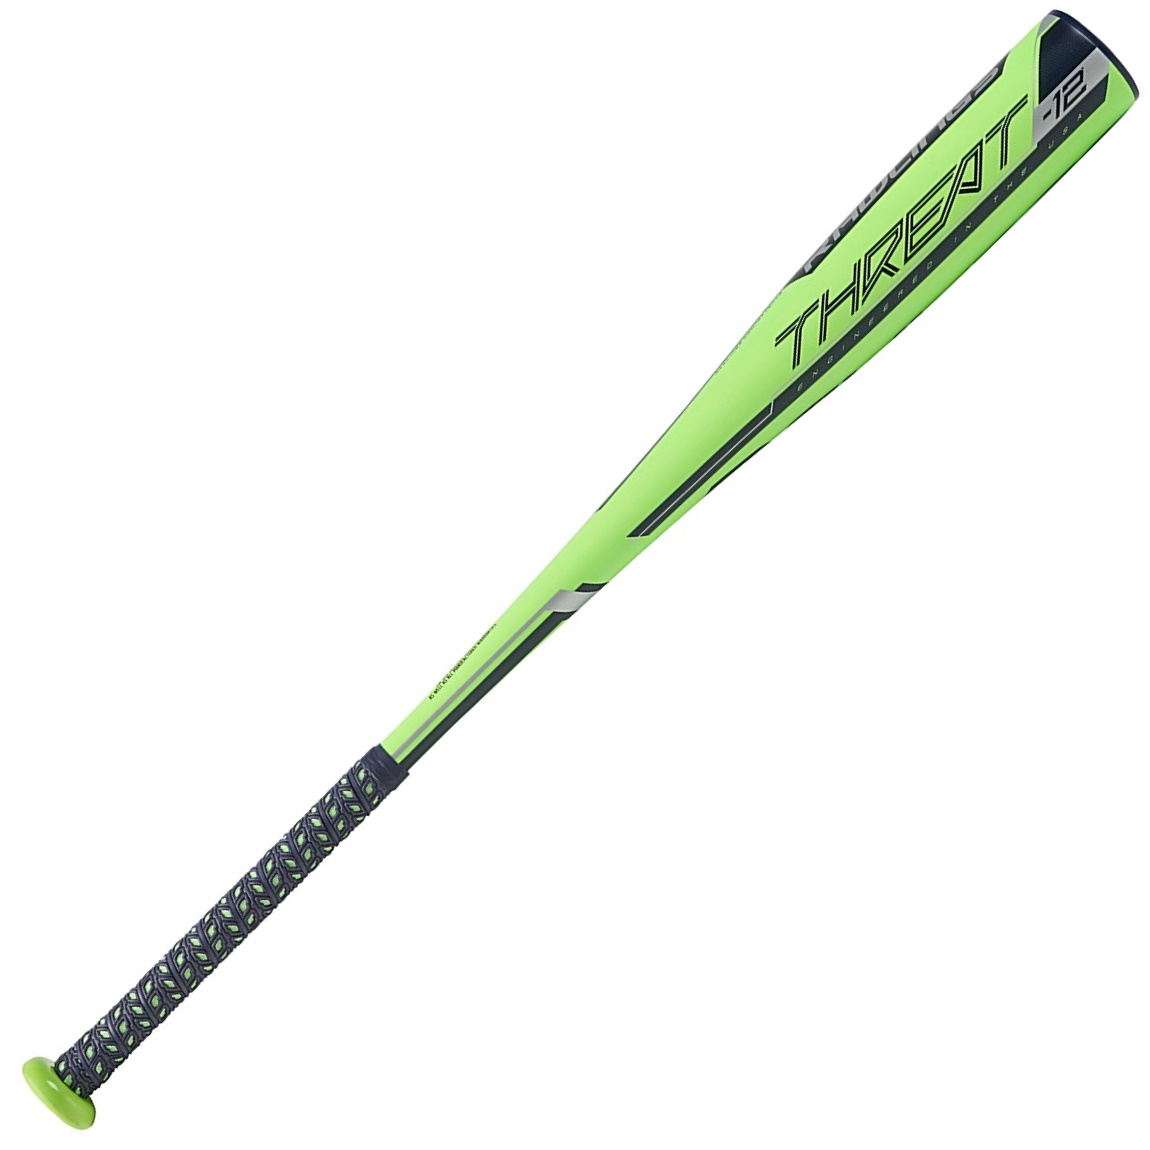 rawlings-2018-threat-usa-baseball-bat-30-inch-18-oz US9T12-3018 Rawlings 083321534966 100% composite design - increases trampoline and overall pop Ultra-lightweight construction